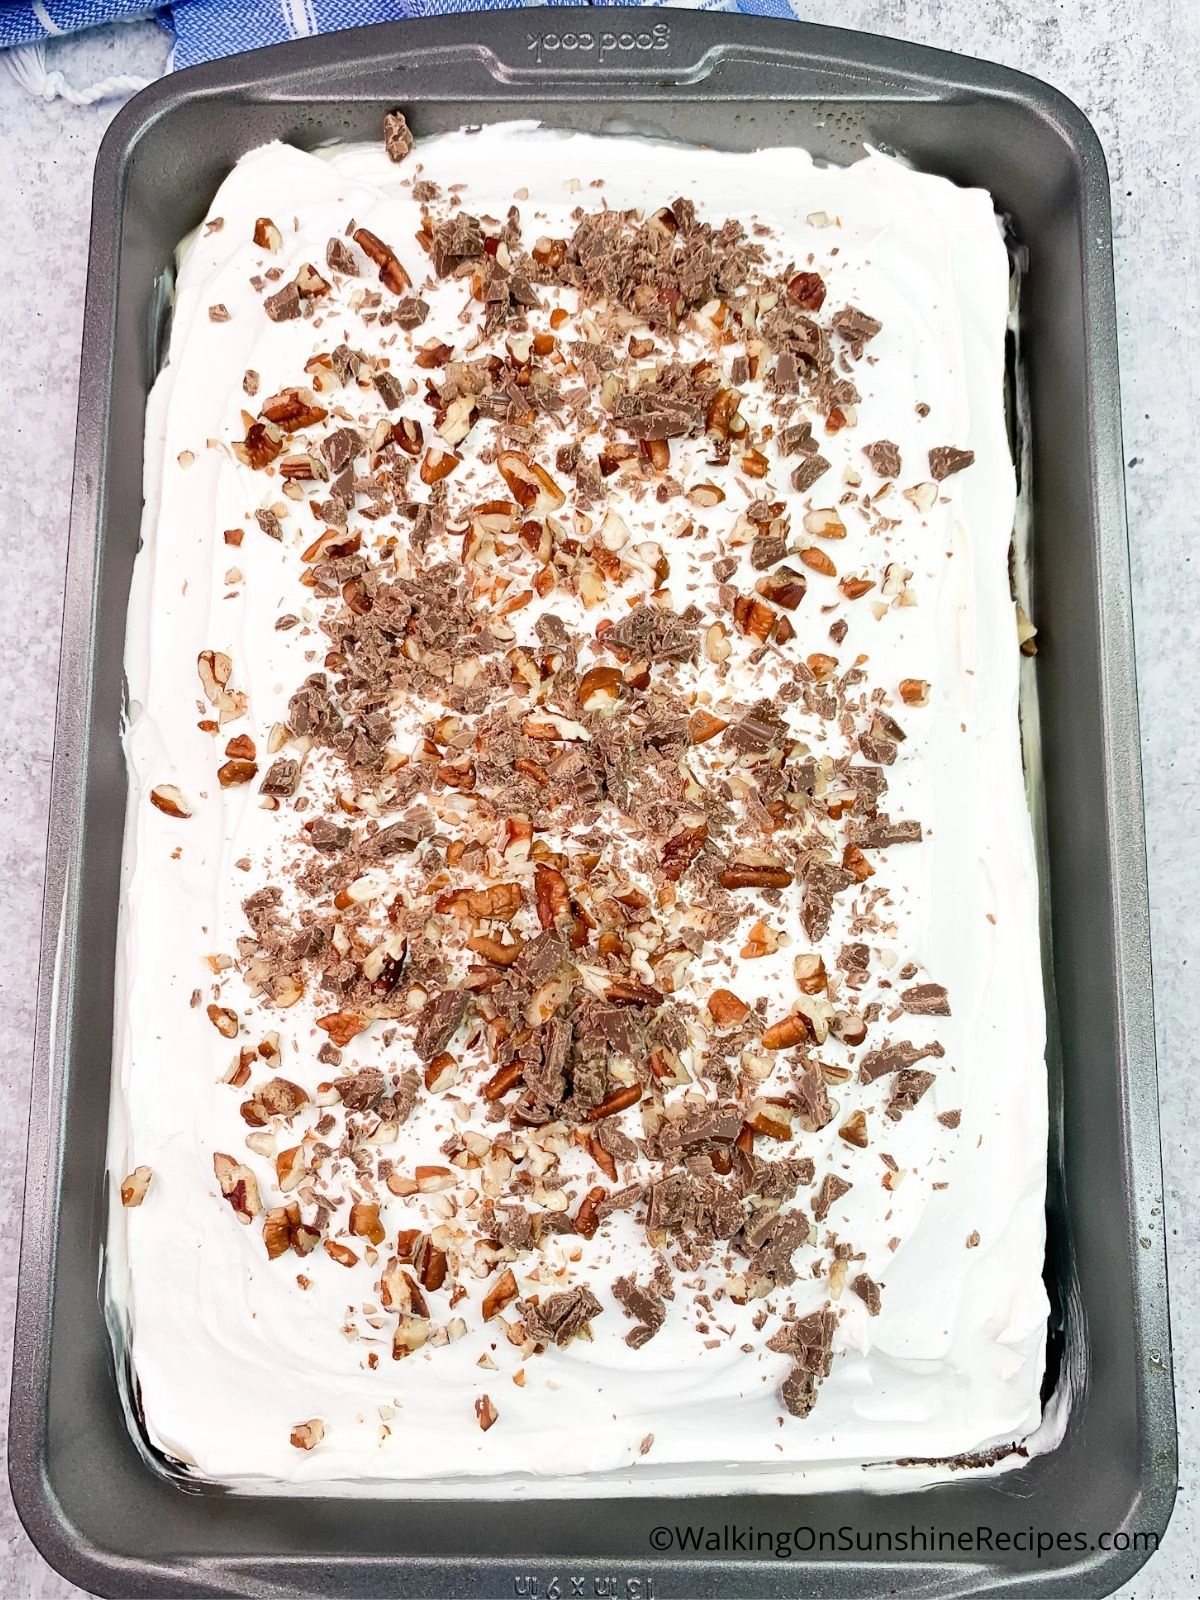 Chocolate cake with whipped topping, chocolate chips and chopped pecans.